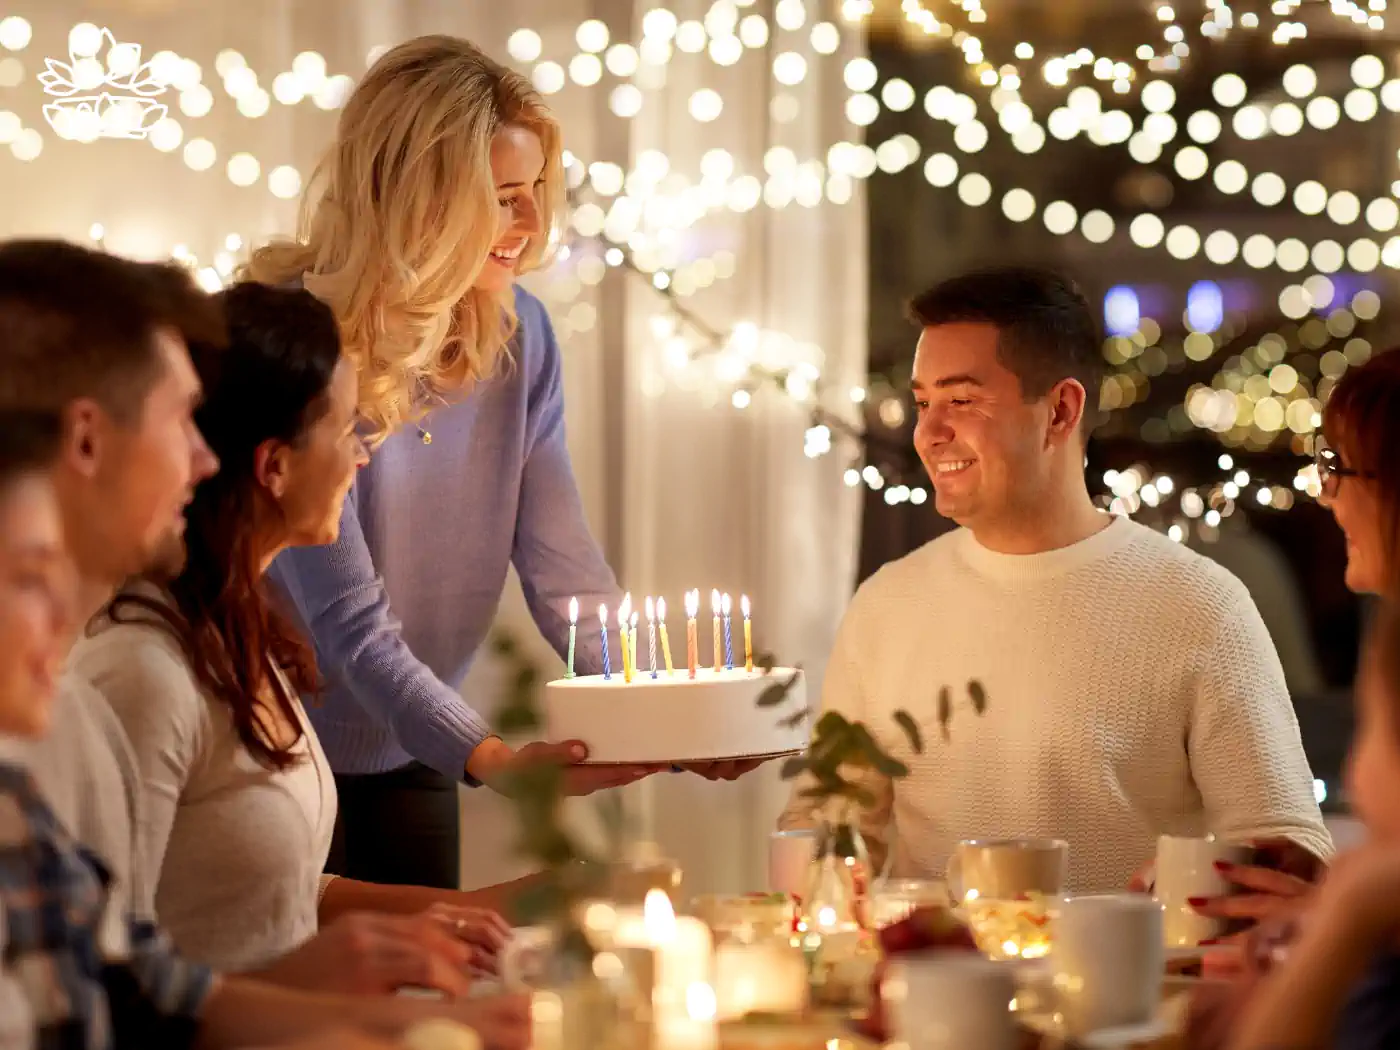 A group of friends celebrating a birthday around a table with a cake and lit candles. Fabulous Flowers and Gifts. Taurus Flowers & Gifts Collection.